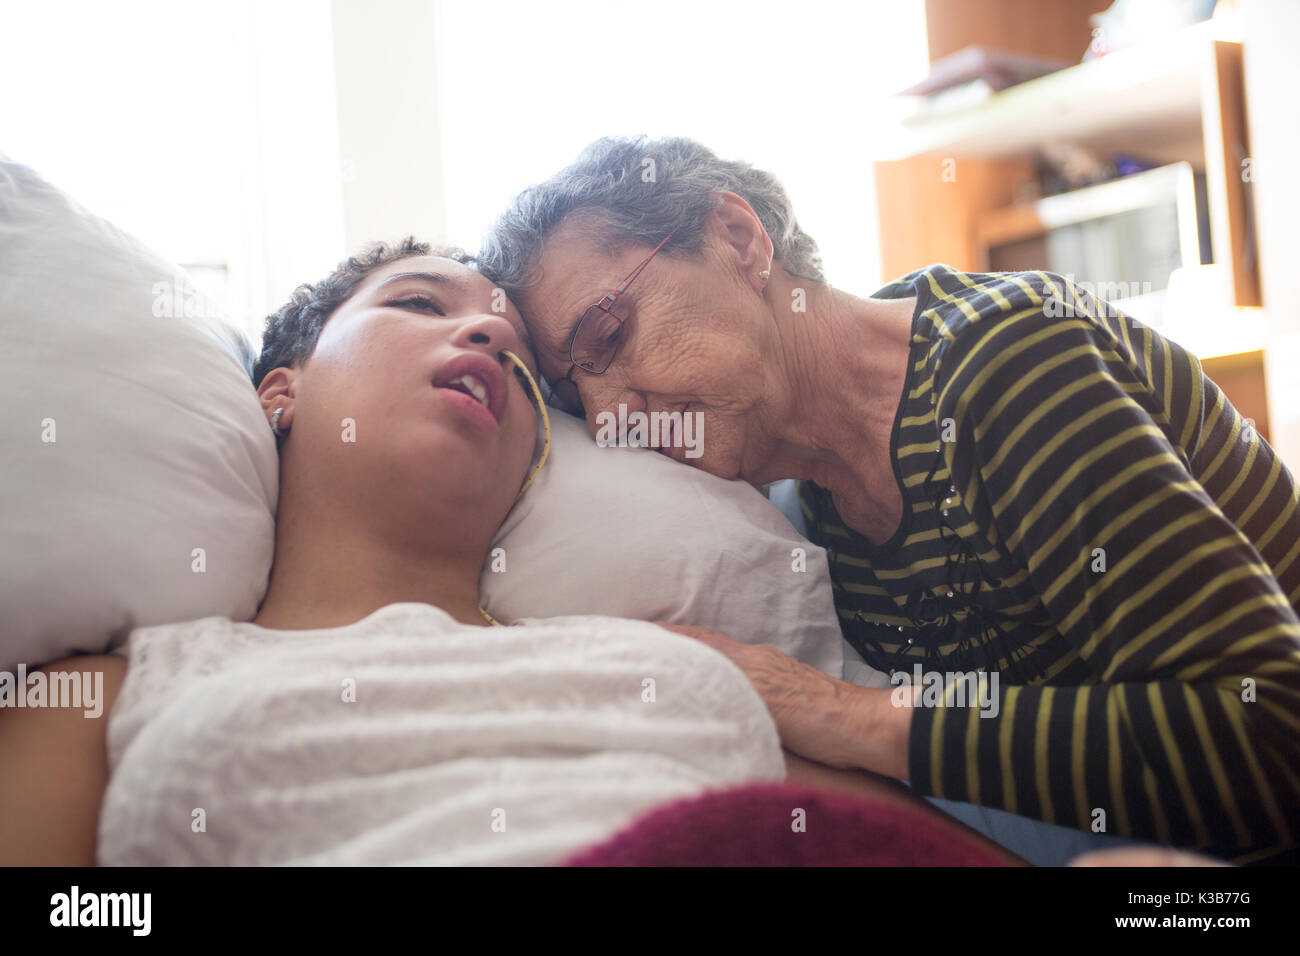 Sick patient lying on bed in hospital for medical background Stock Photo